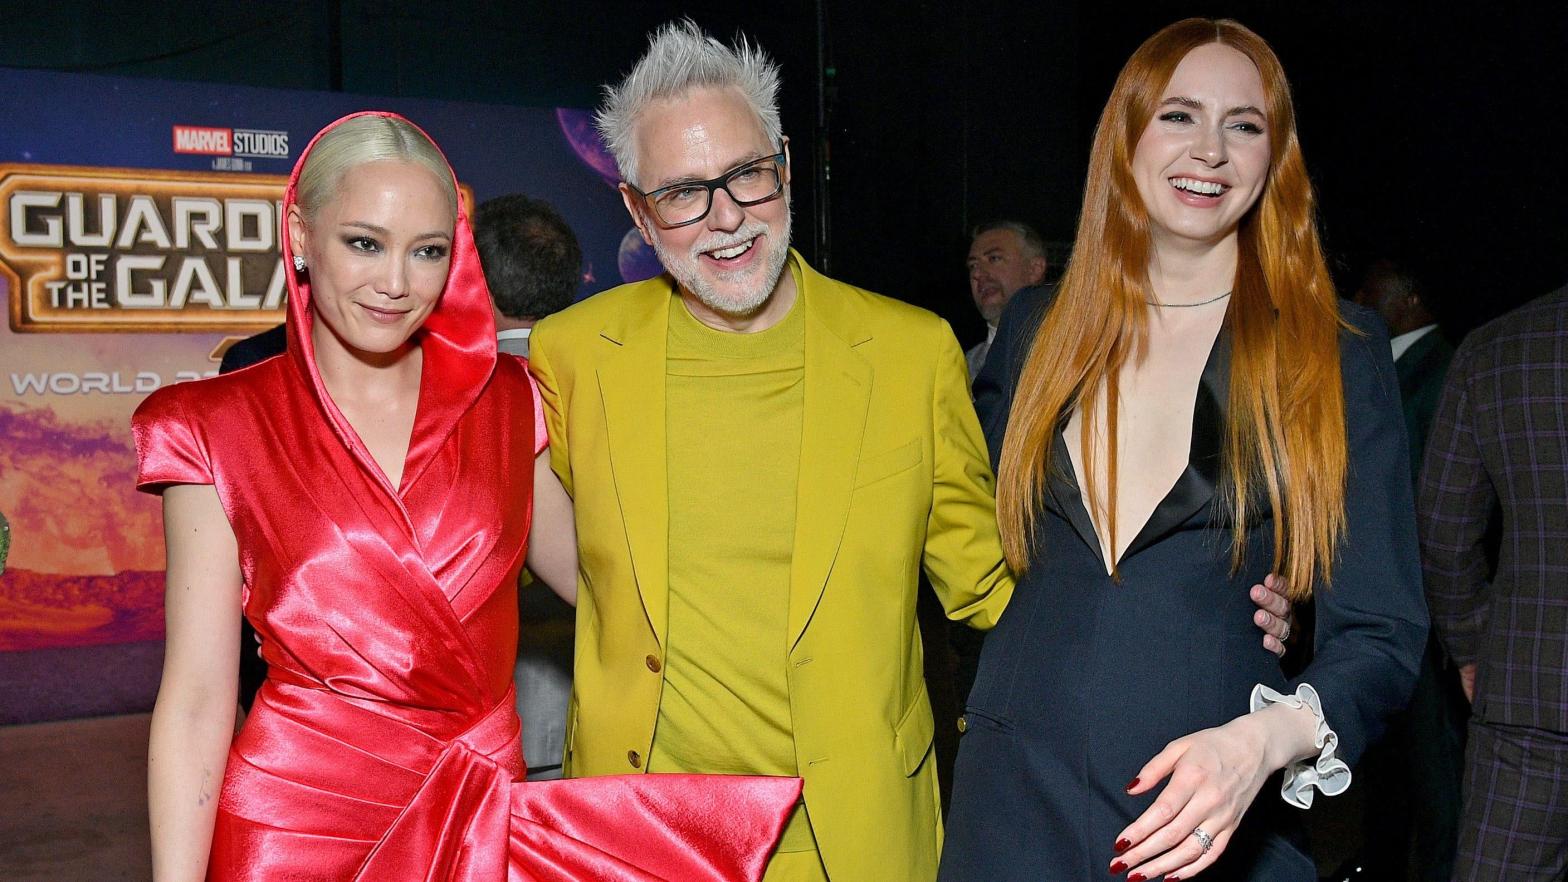 Gunn with two of his Guardians, Pom Klementieff and Karen Gillan. (Image: Disney/Getty)